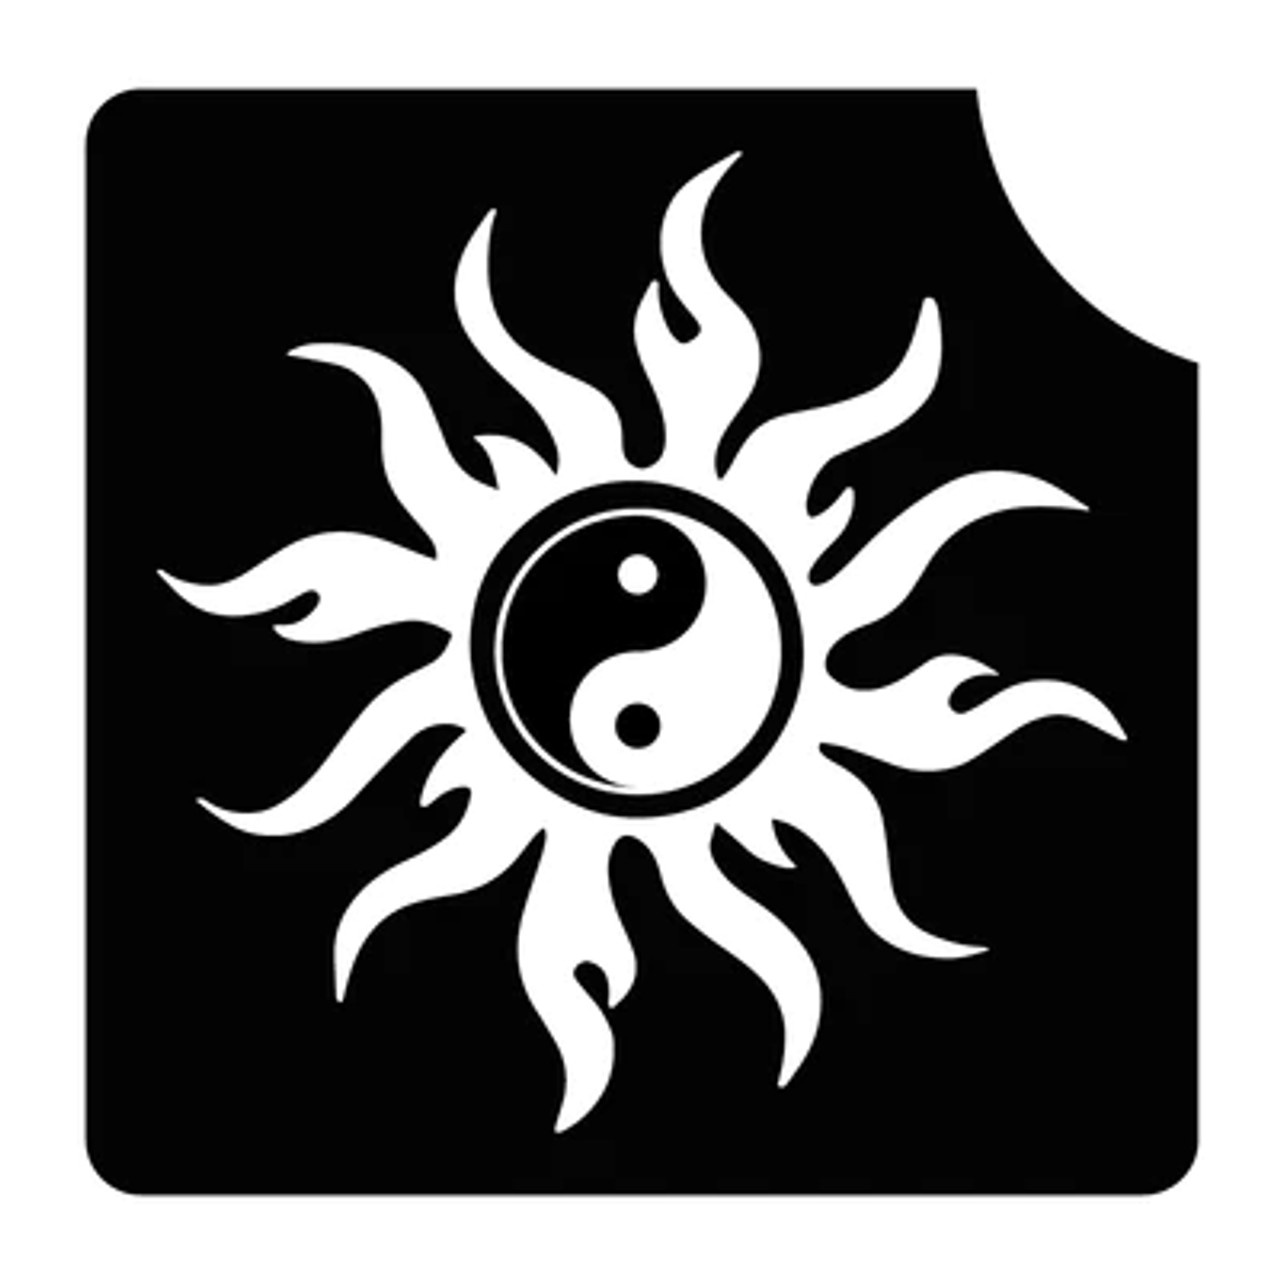 Ying Yang Sun 3 Layer Stencil Pack of 5